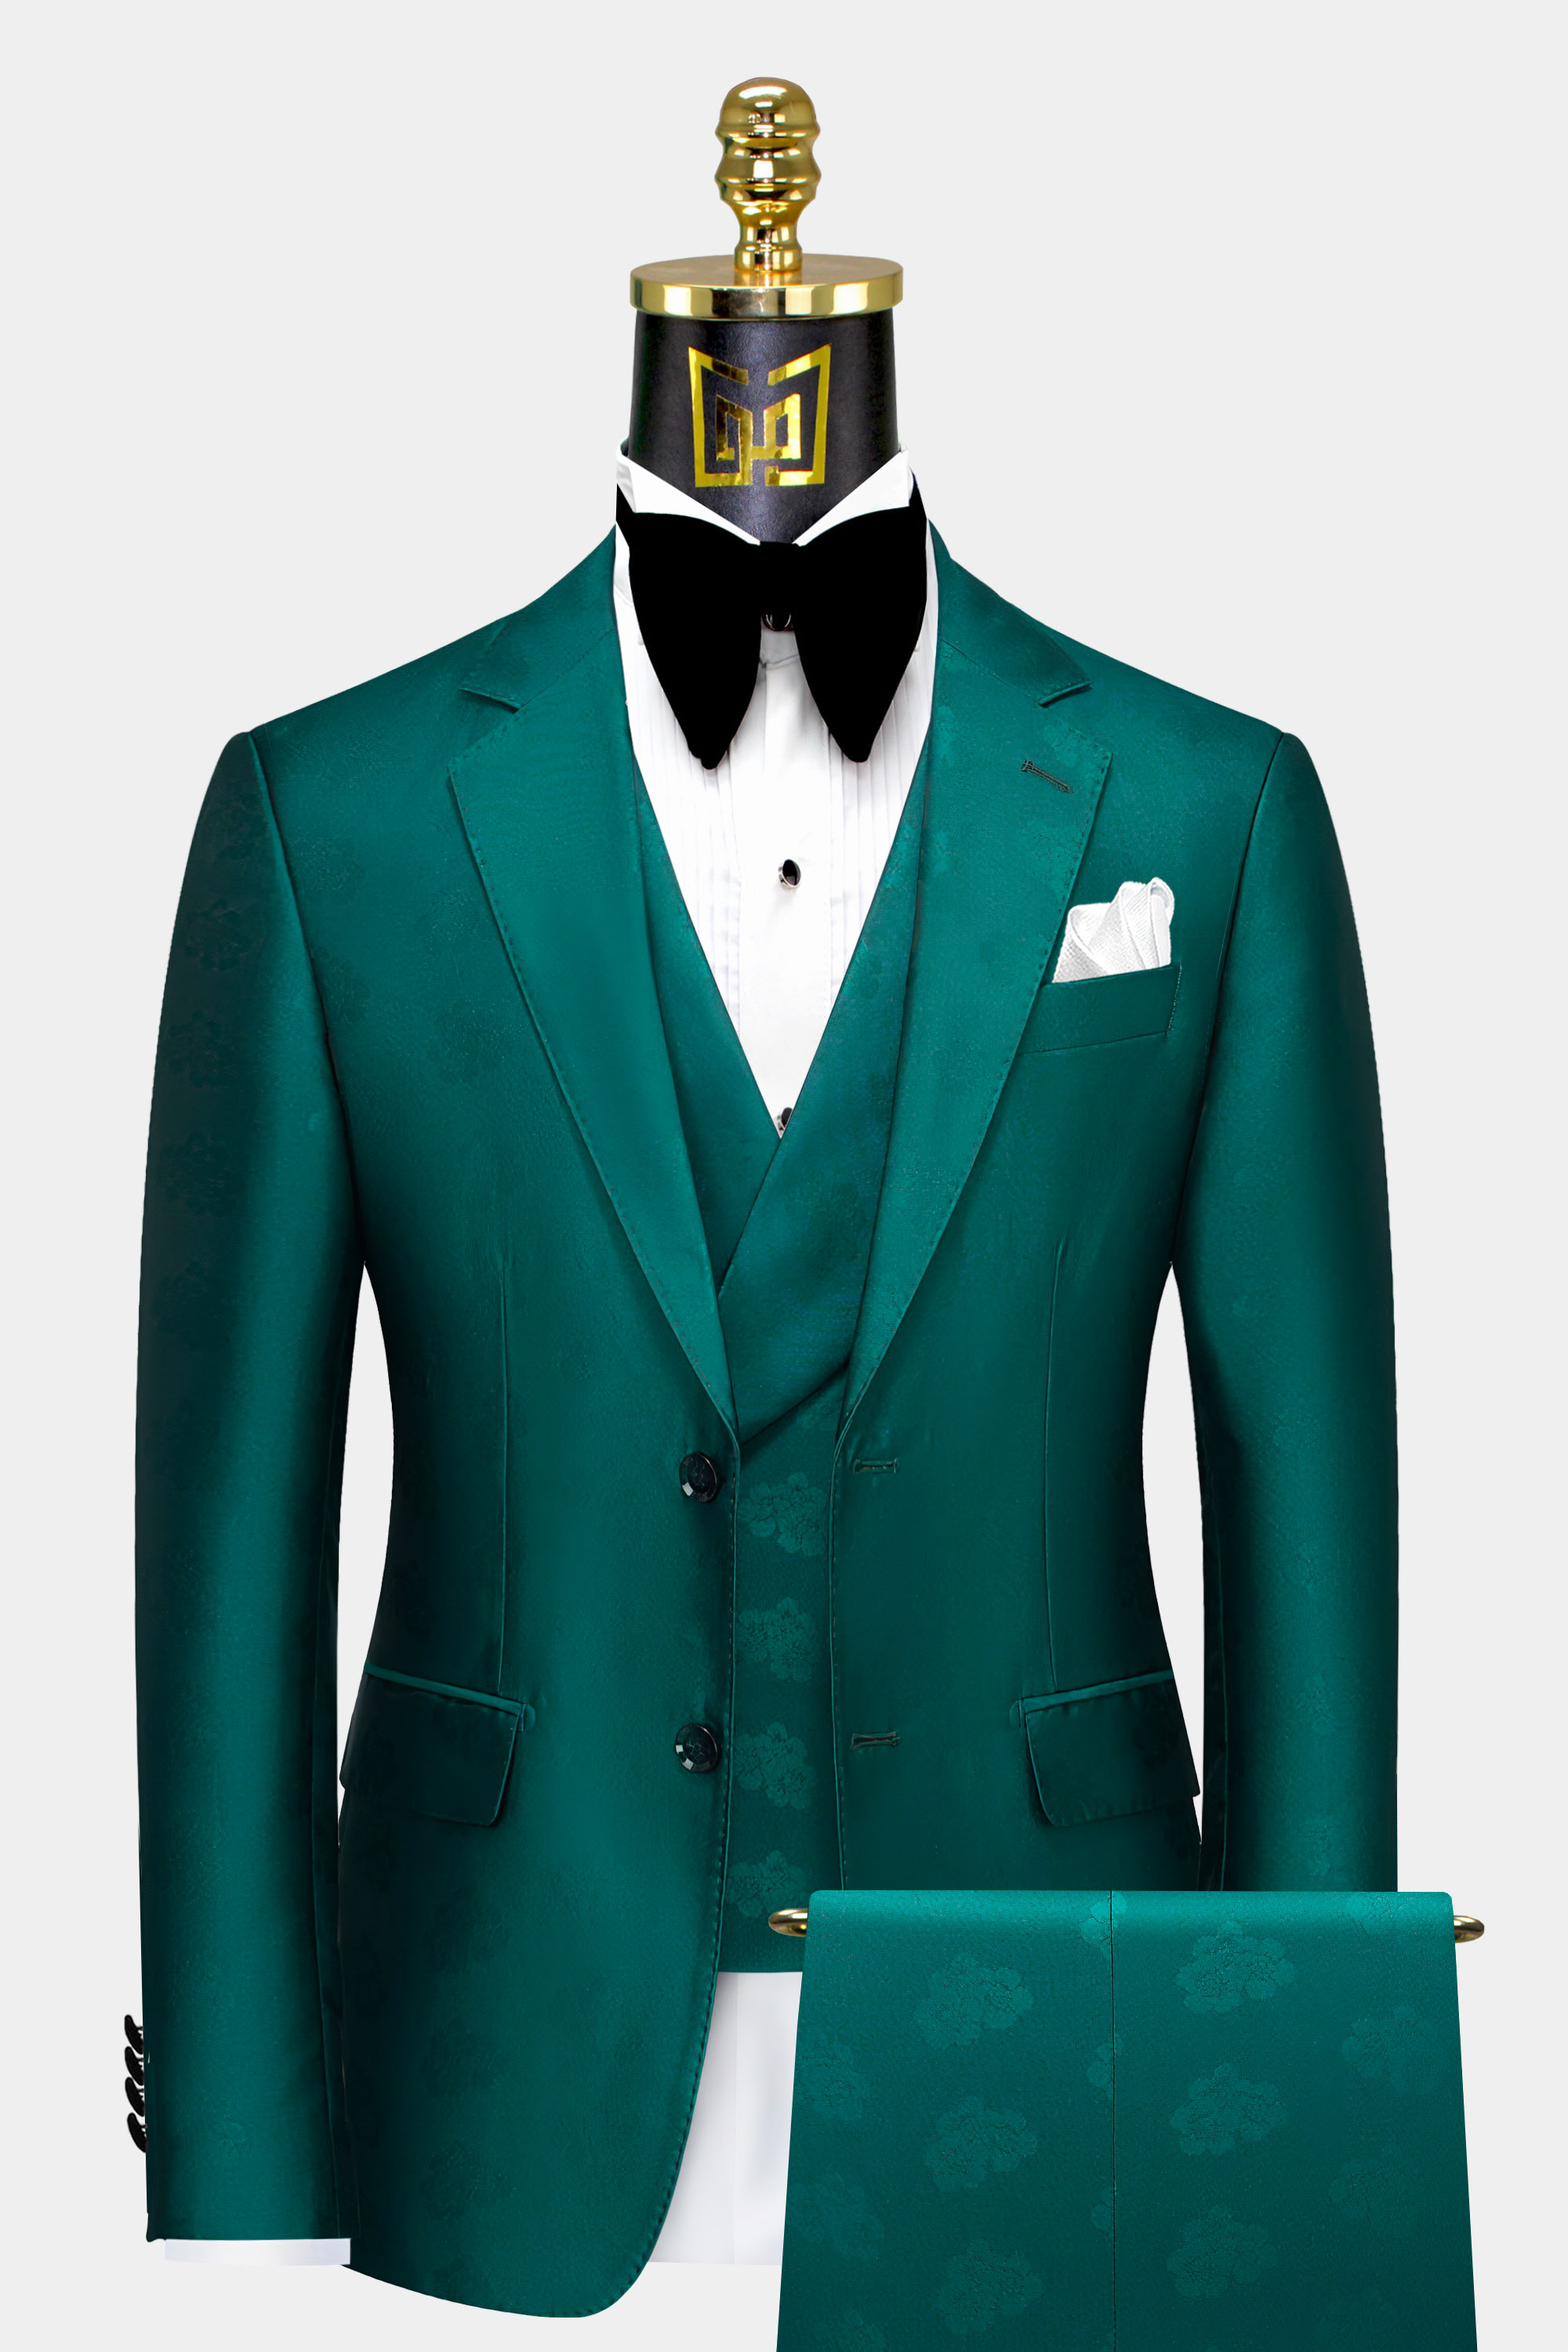 Mint Green Men's Slim Fit Suits 3 Piece Groom Party Prom Tuxedo